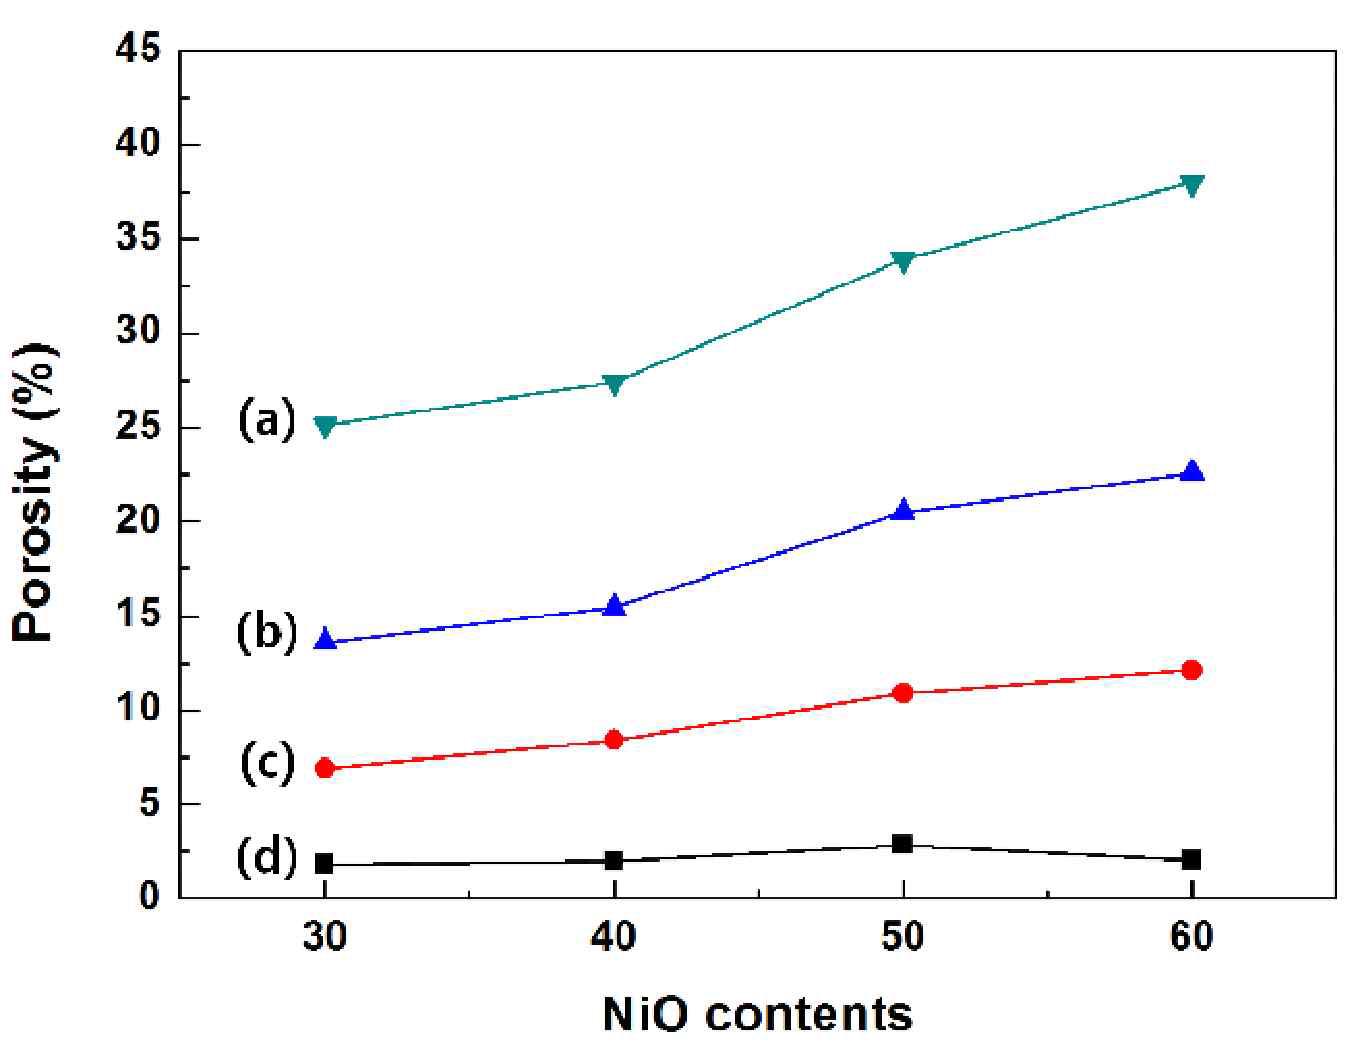 Porosity of the NiO/YSZ cermets (5 wt% carbon black) sintered at (a)1250 ℃, (b) 1300 ℃, (c) 1350 ℃, and (d) 1400 ℃ as a function of NiO content.